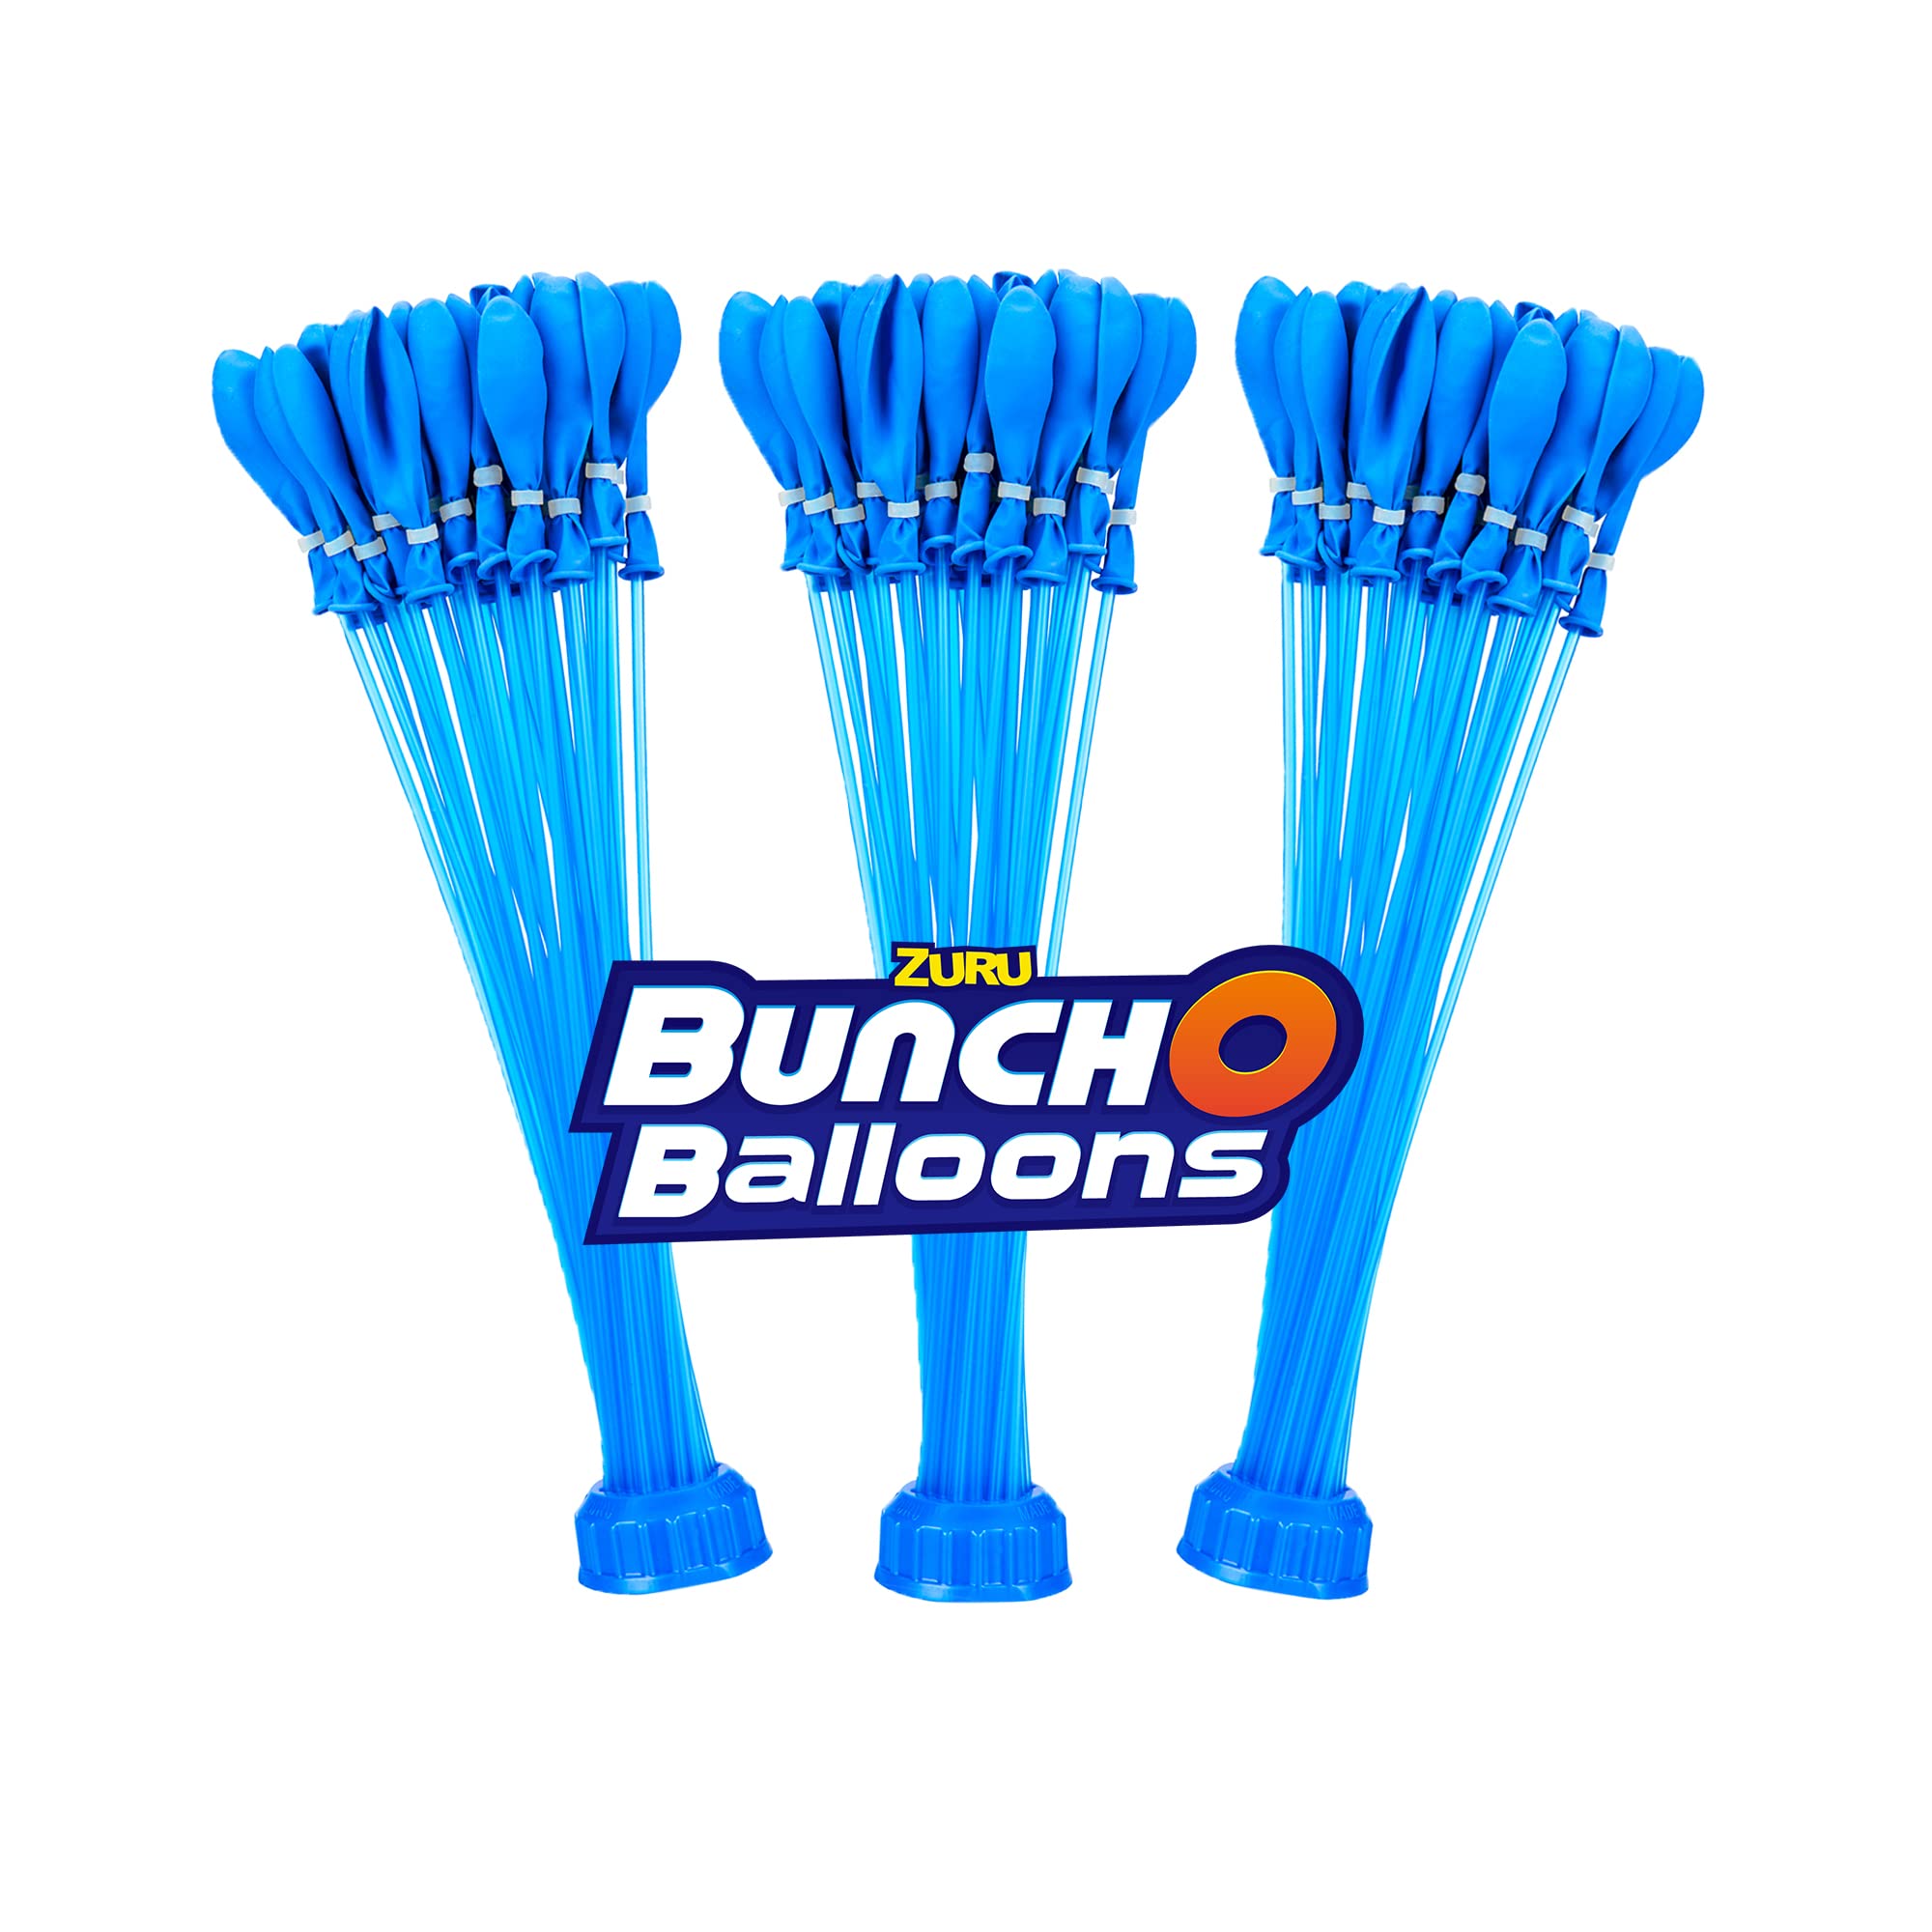 Bunch O Balloons - Instant Water Balloons -A Blue (3 bunches - 100 Total Water Balloons)